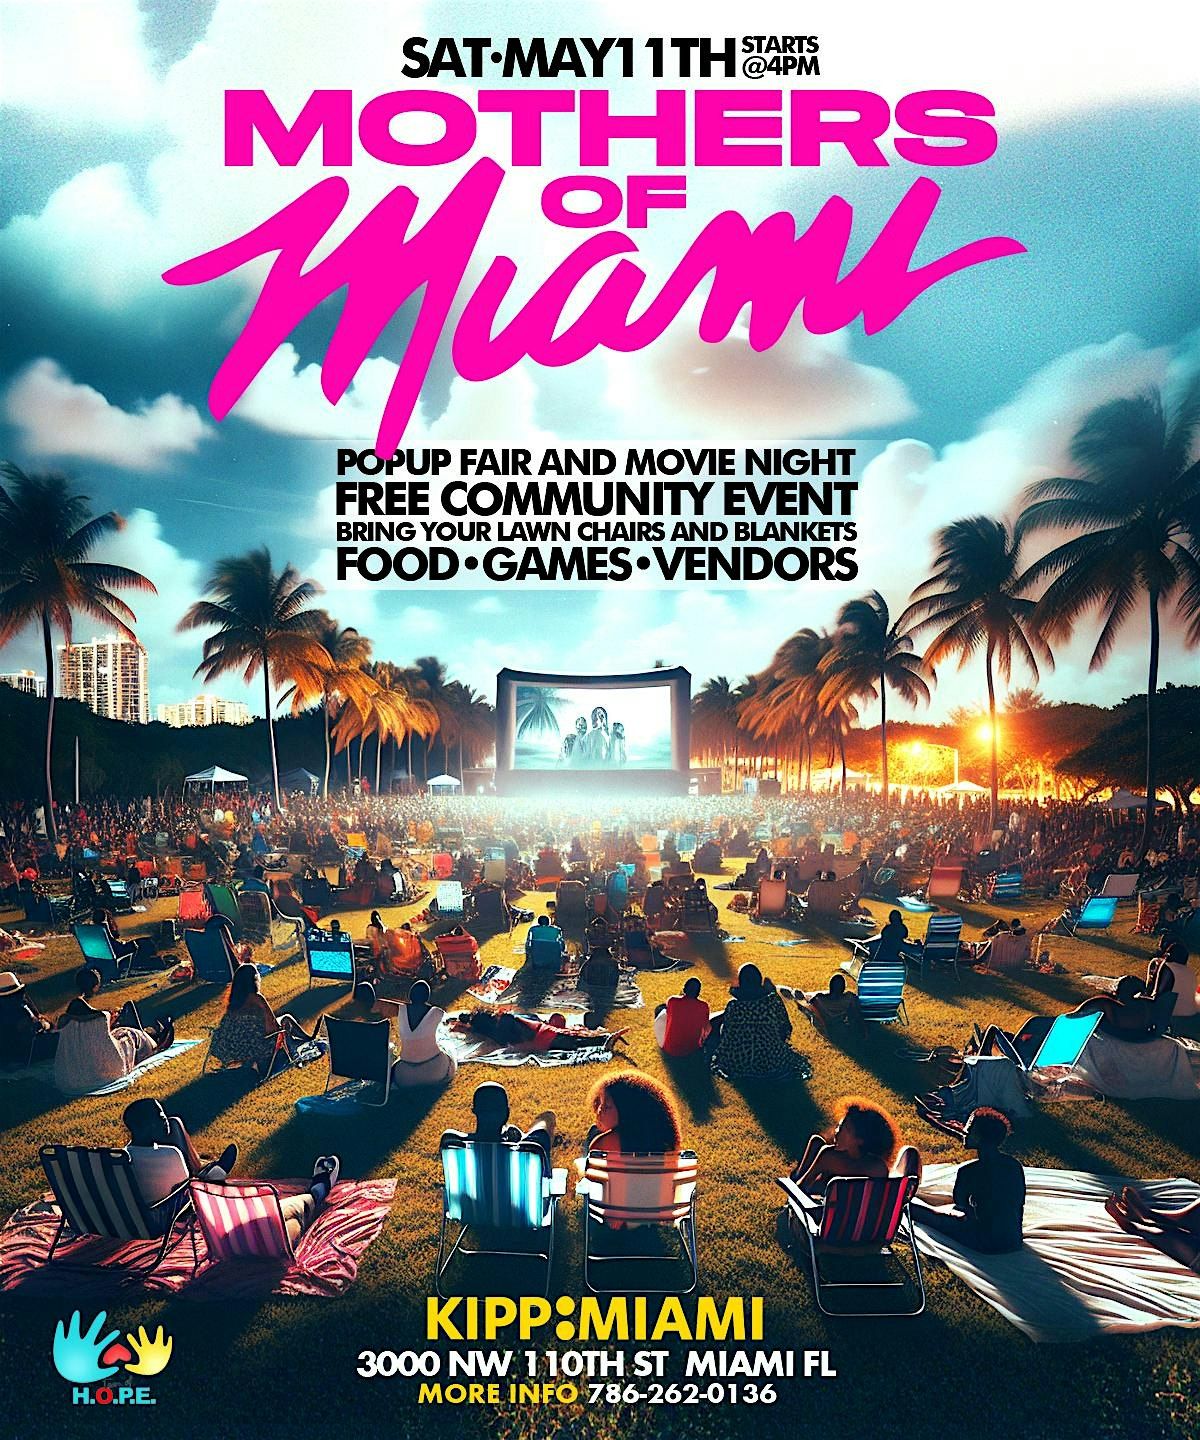 MOM - MOTHERS OF MIAMI POPUP EVENT AND MOVIE NIGHT